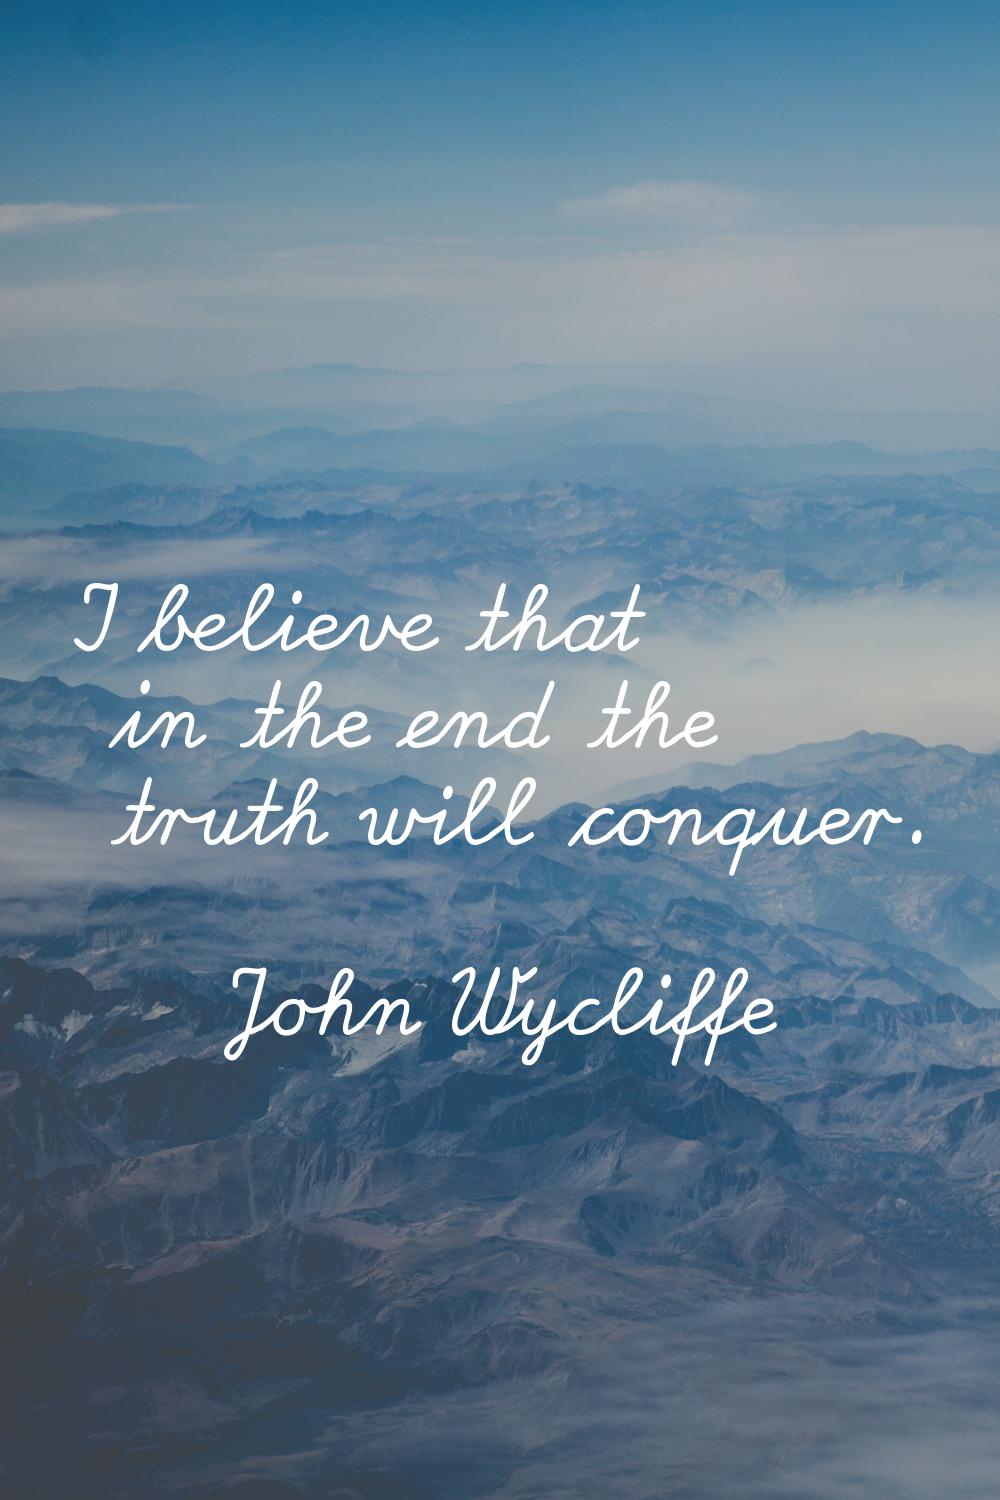 I believe that in the end the truth will conquer.